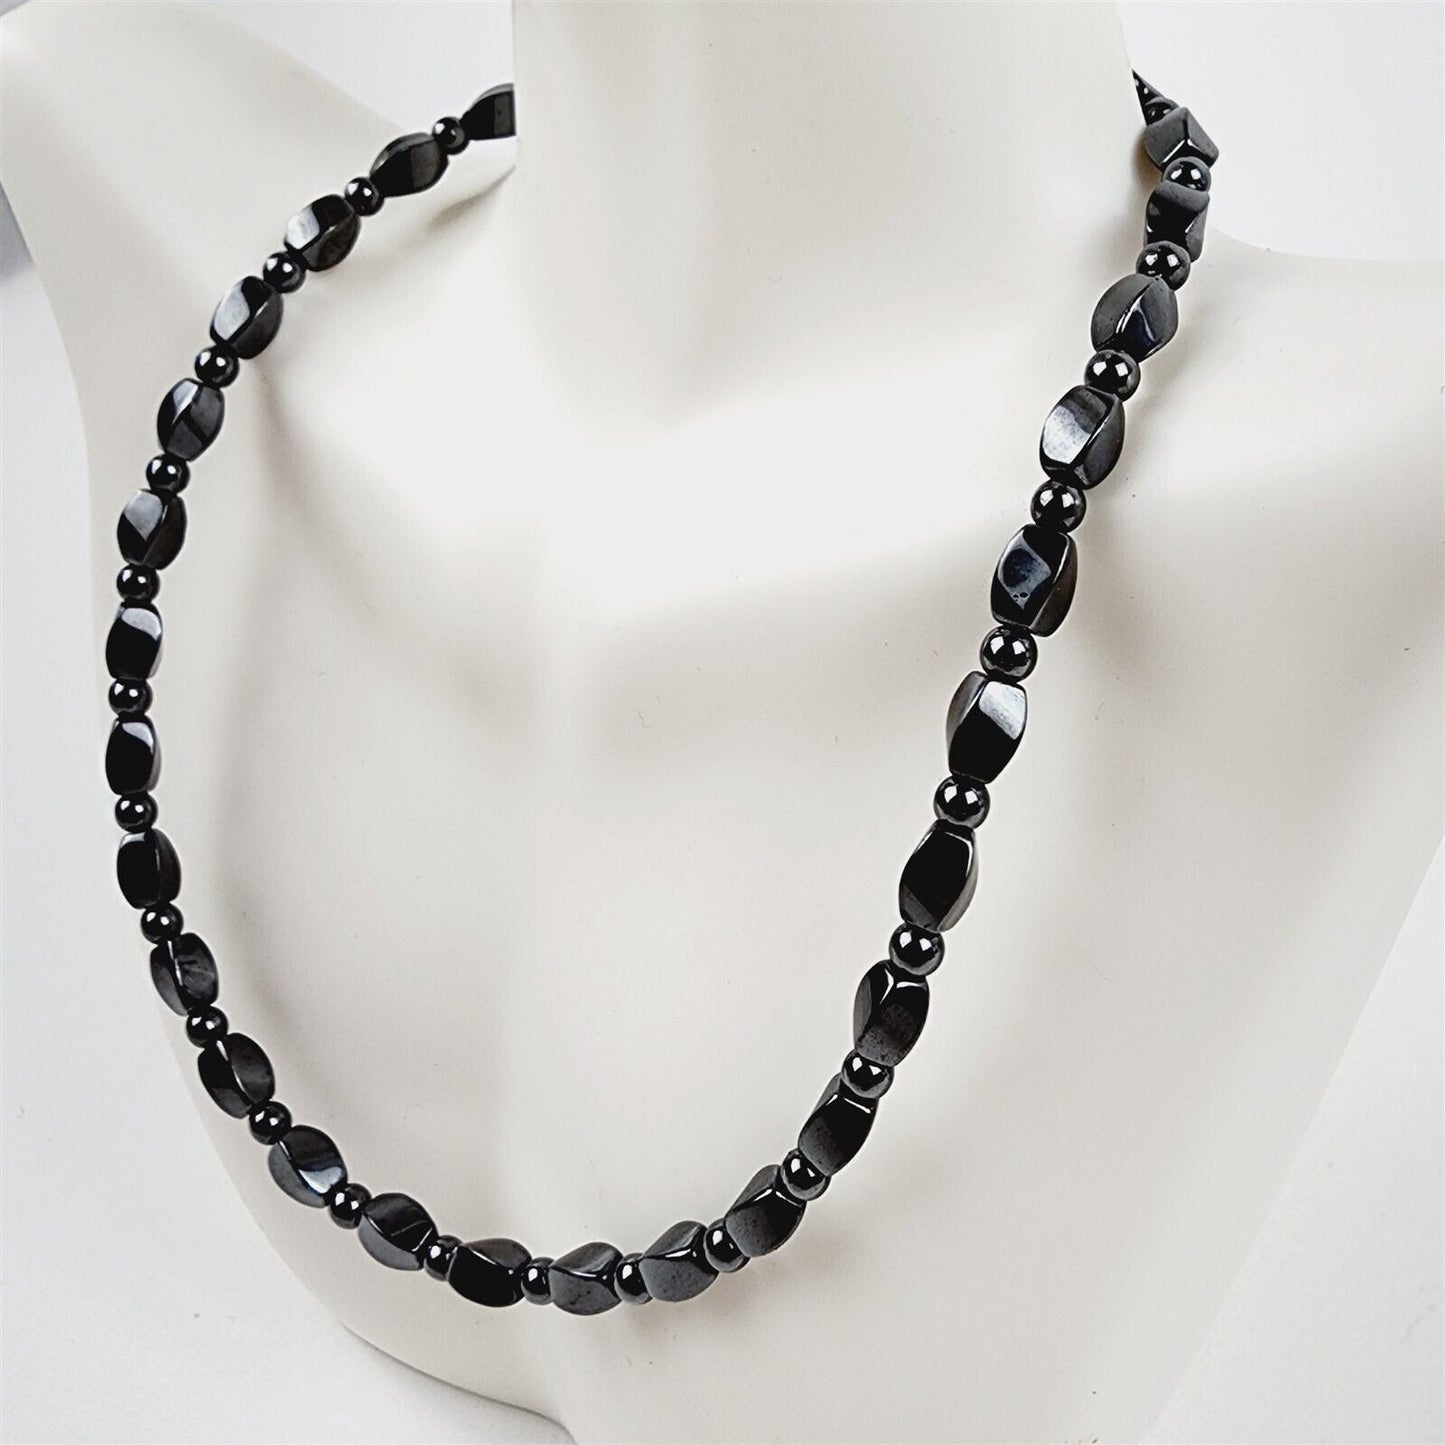 Black Short Twist Magnetic Beaded Necklace Therapeutic Handmade